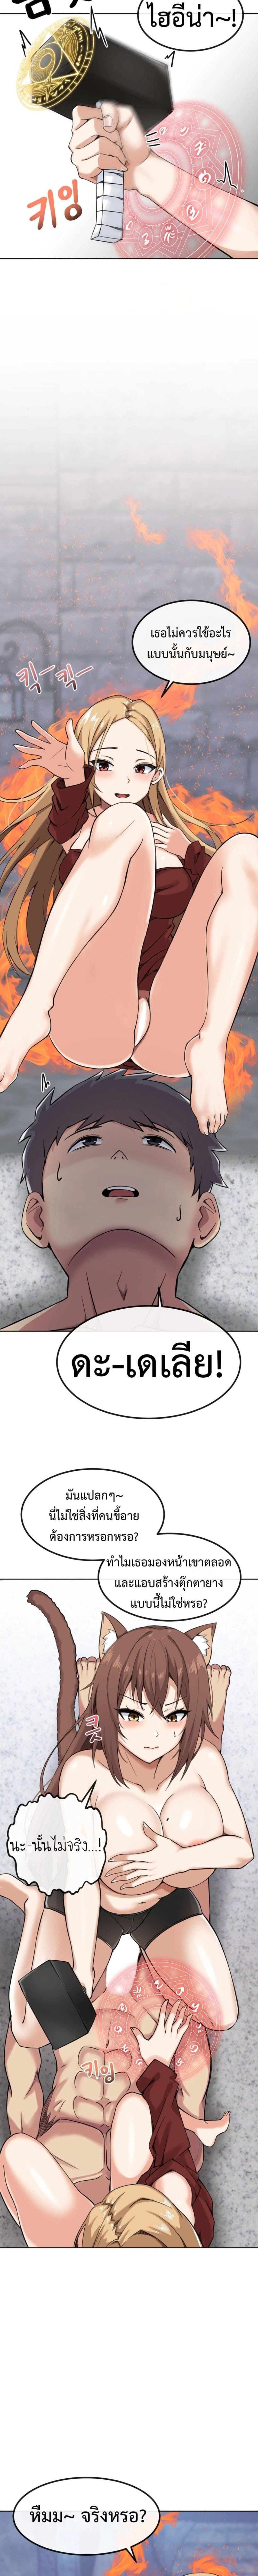 Meat Doll Workshop in Another World ตอนที่ 2 ภาพ 8